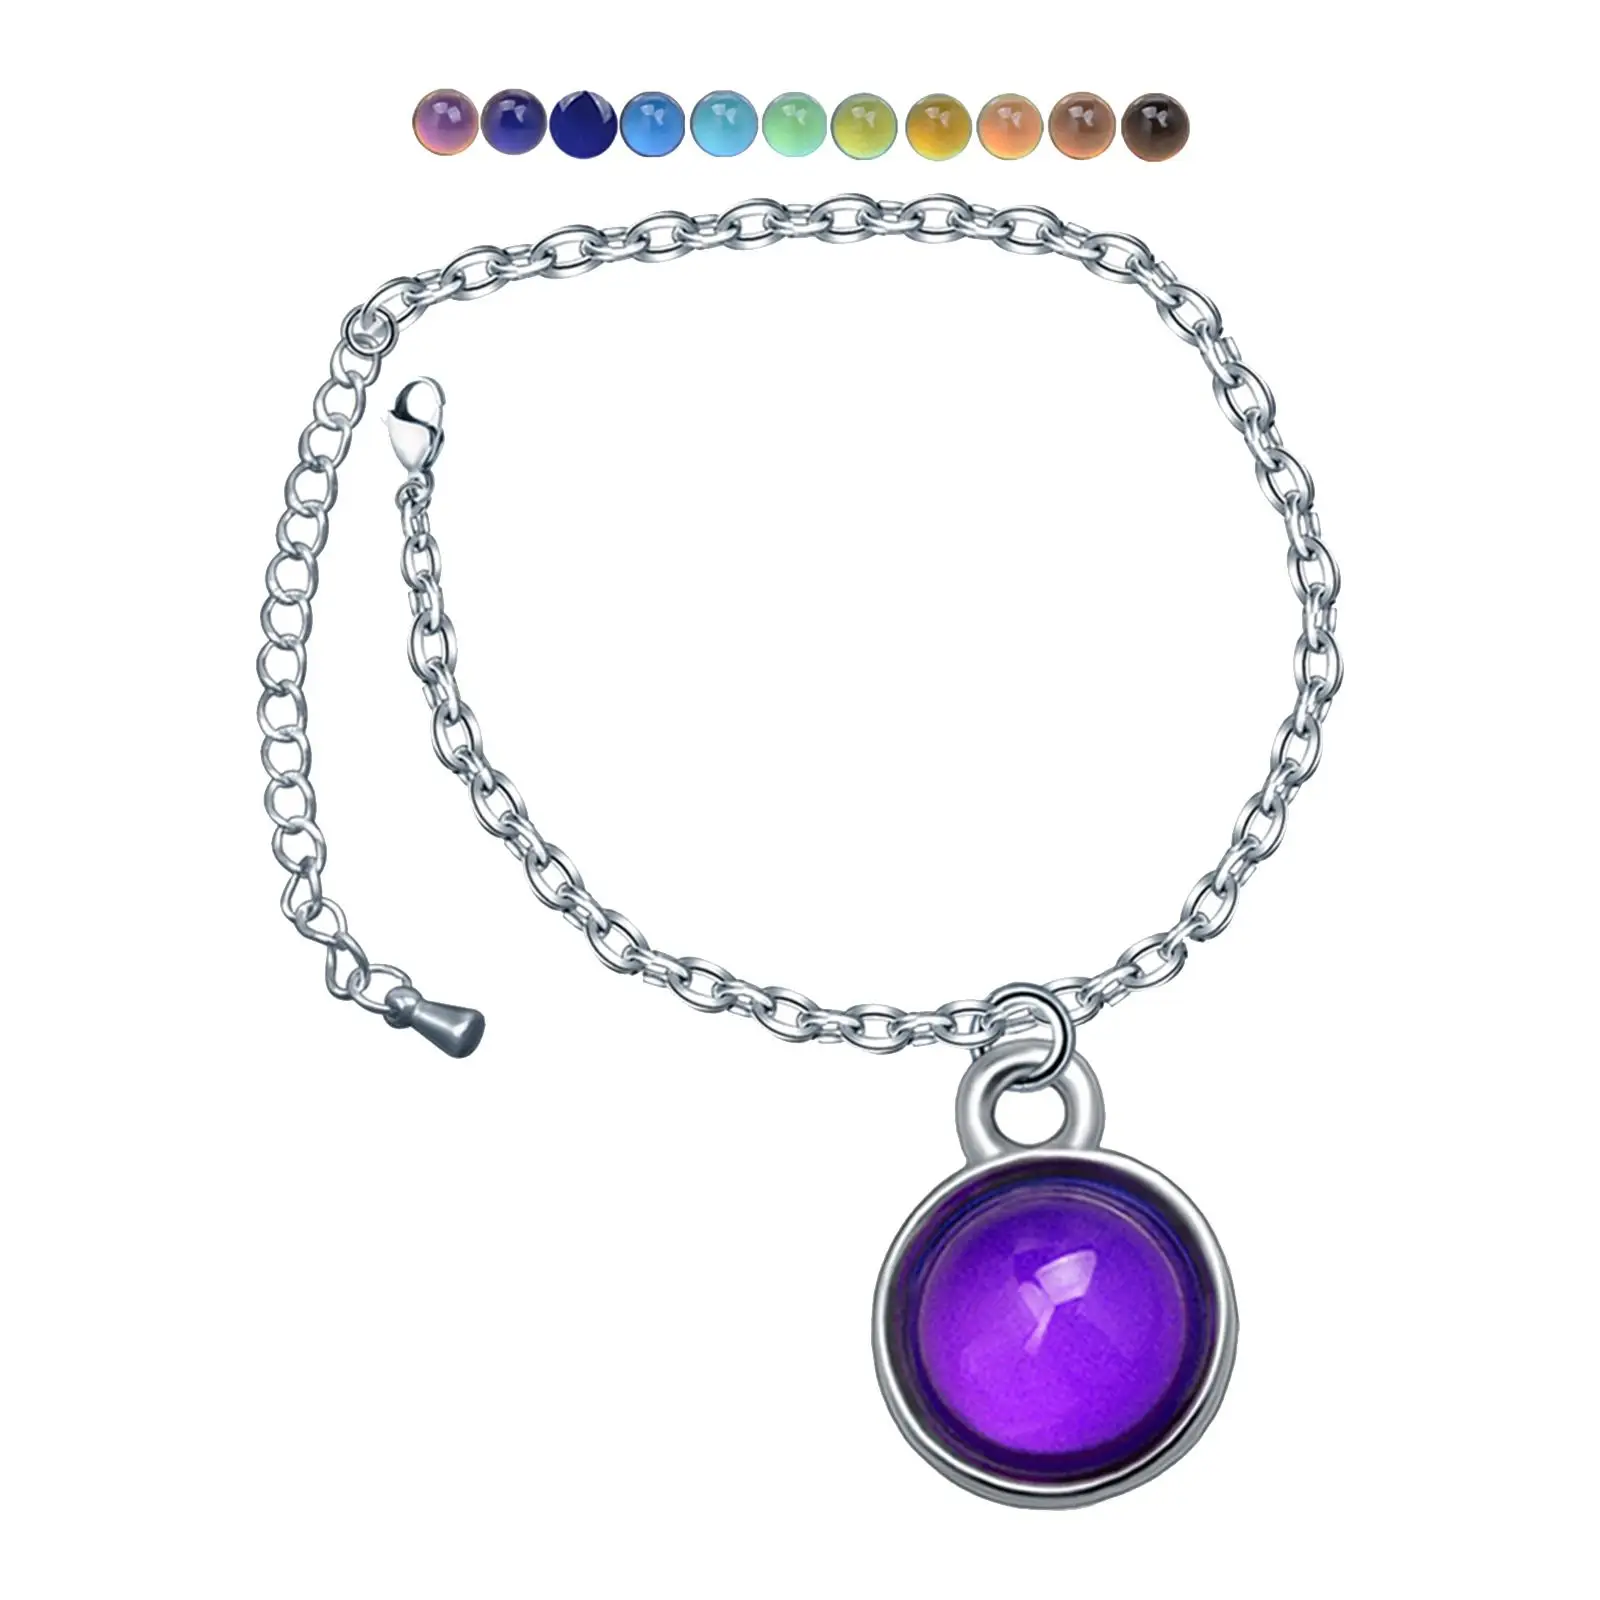 Temperature Sensitive Color Changing Bracelet with Pendant for Wedding Gift